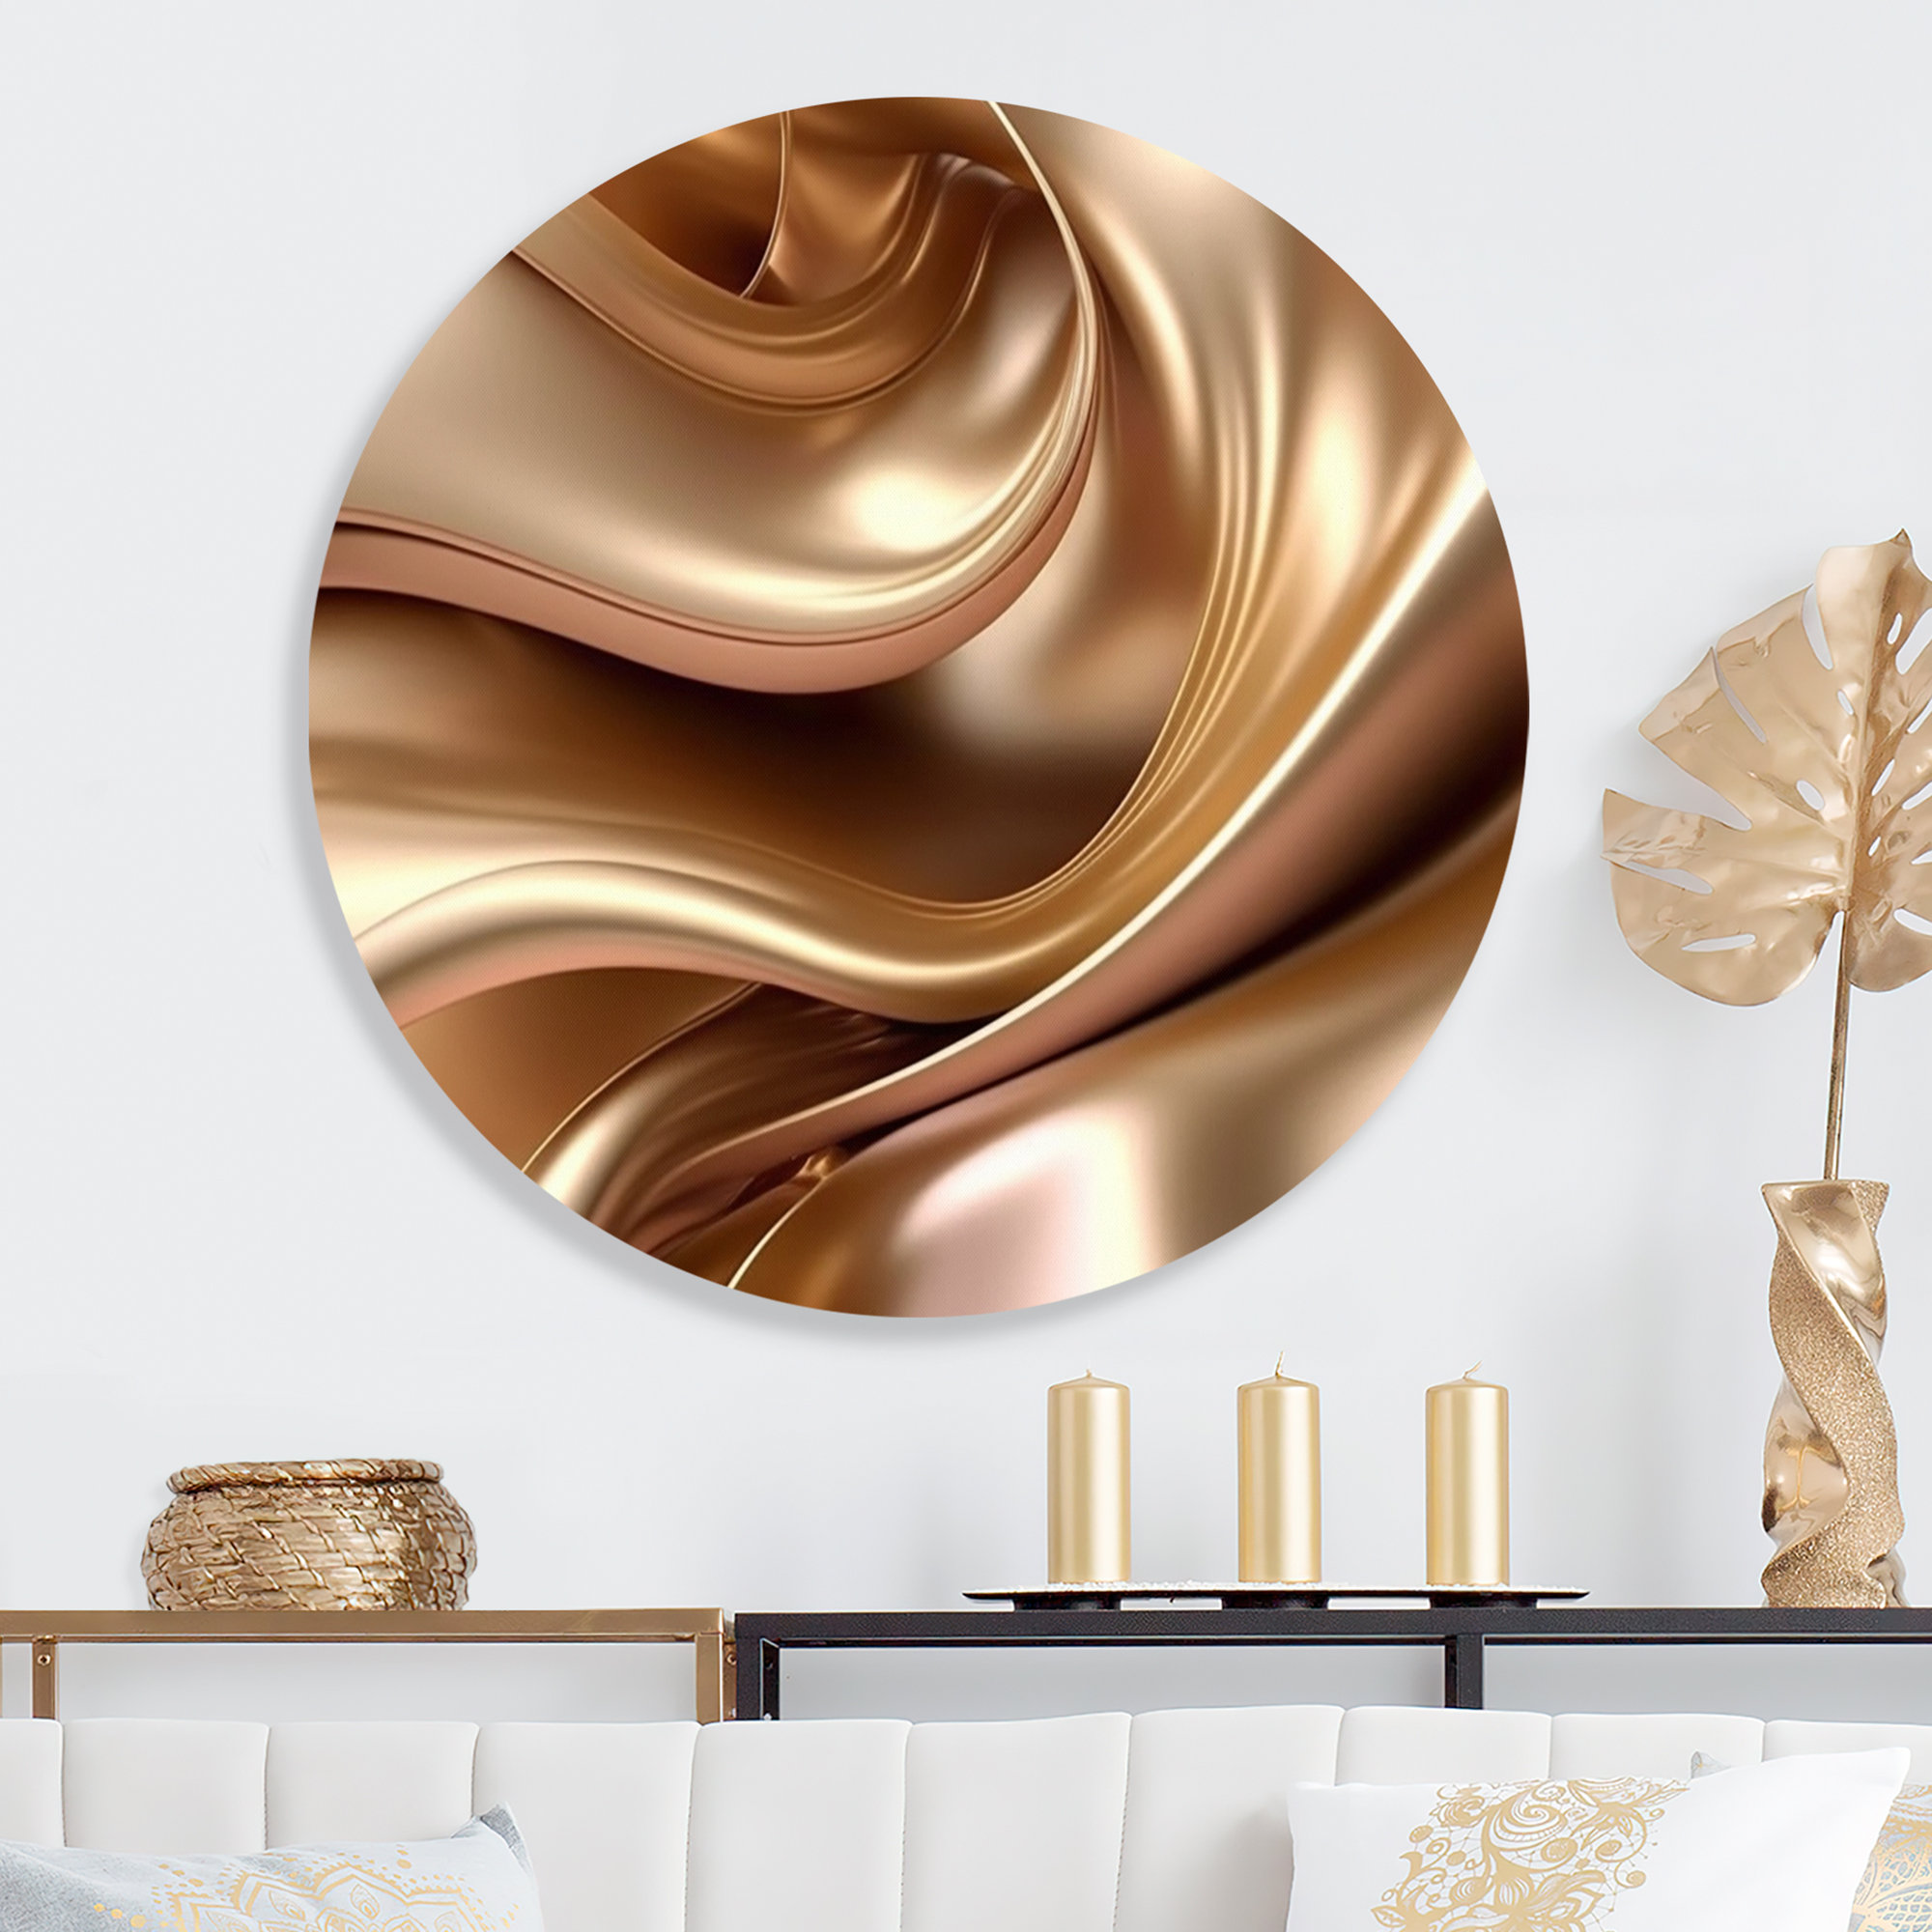 Smooth Liquid Gold in Soft Shades of Gold and Taupe II - Unframed Print Mercer41 Size: 16 W x 16 H